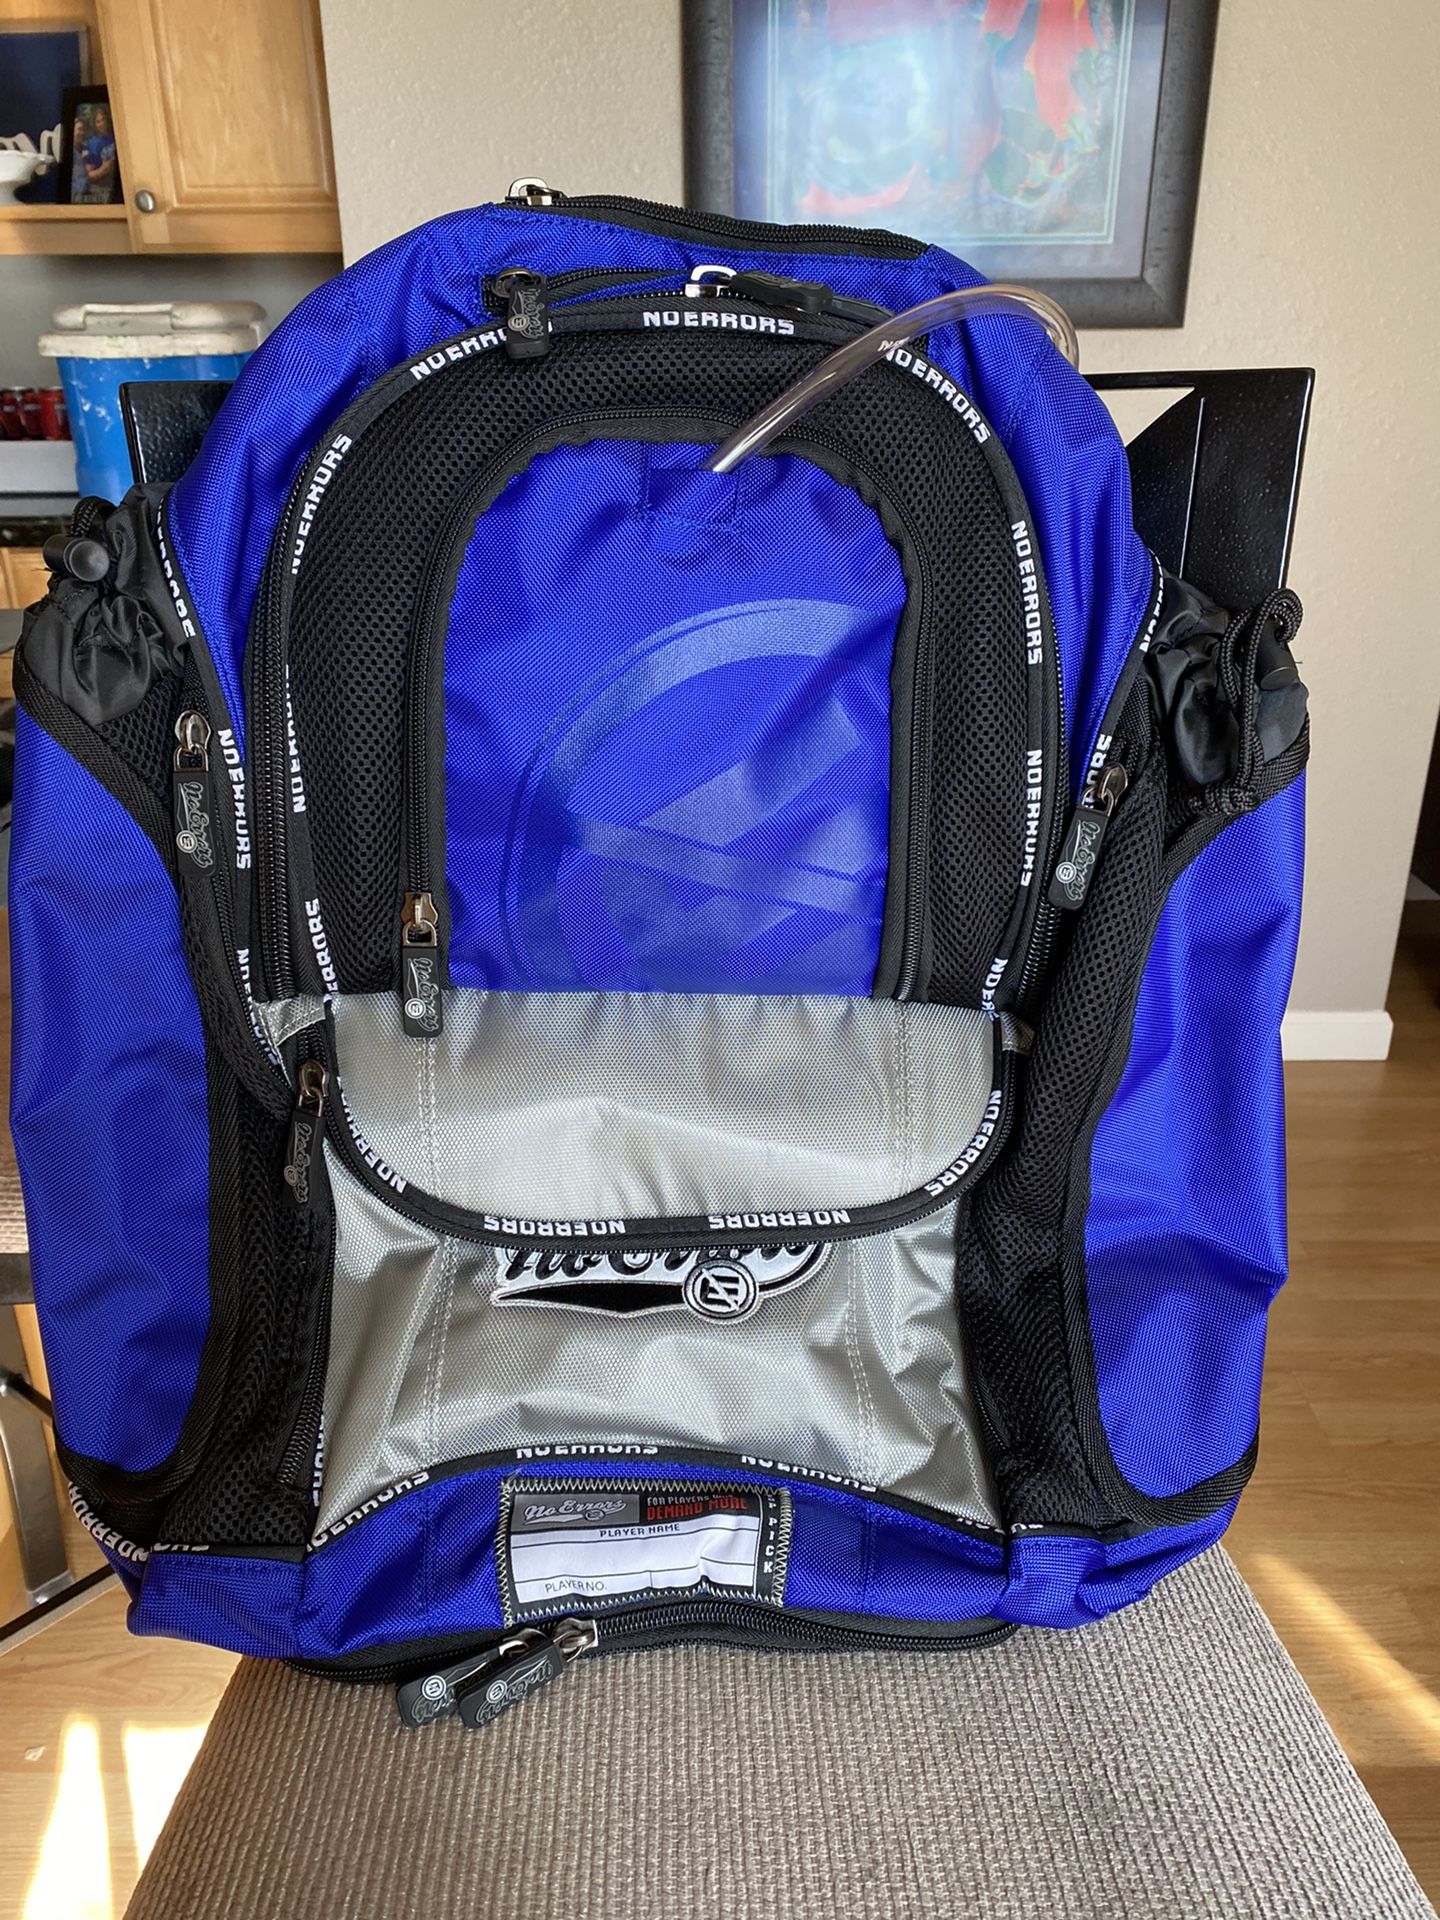 No Errors- Baseball /Softball Backpack, holds Two Bats, Has Water Pack Included ! I Have Two Of Them Brand New! Never Used. $45 Each Or Both For  $80!